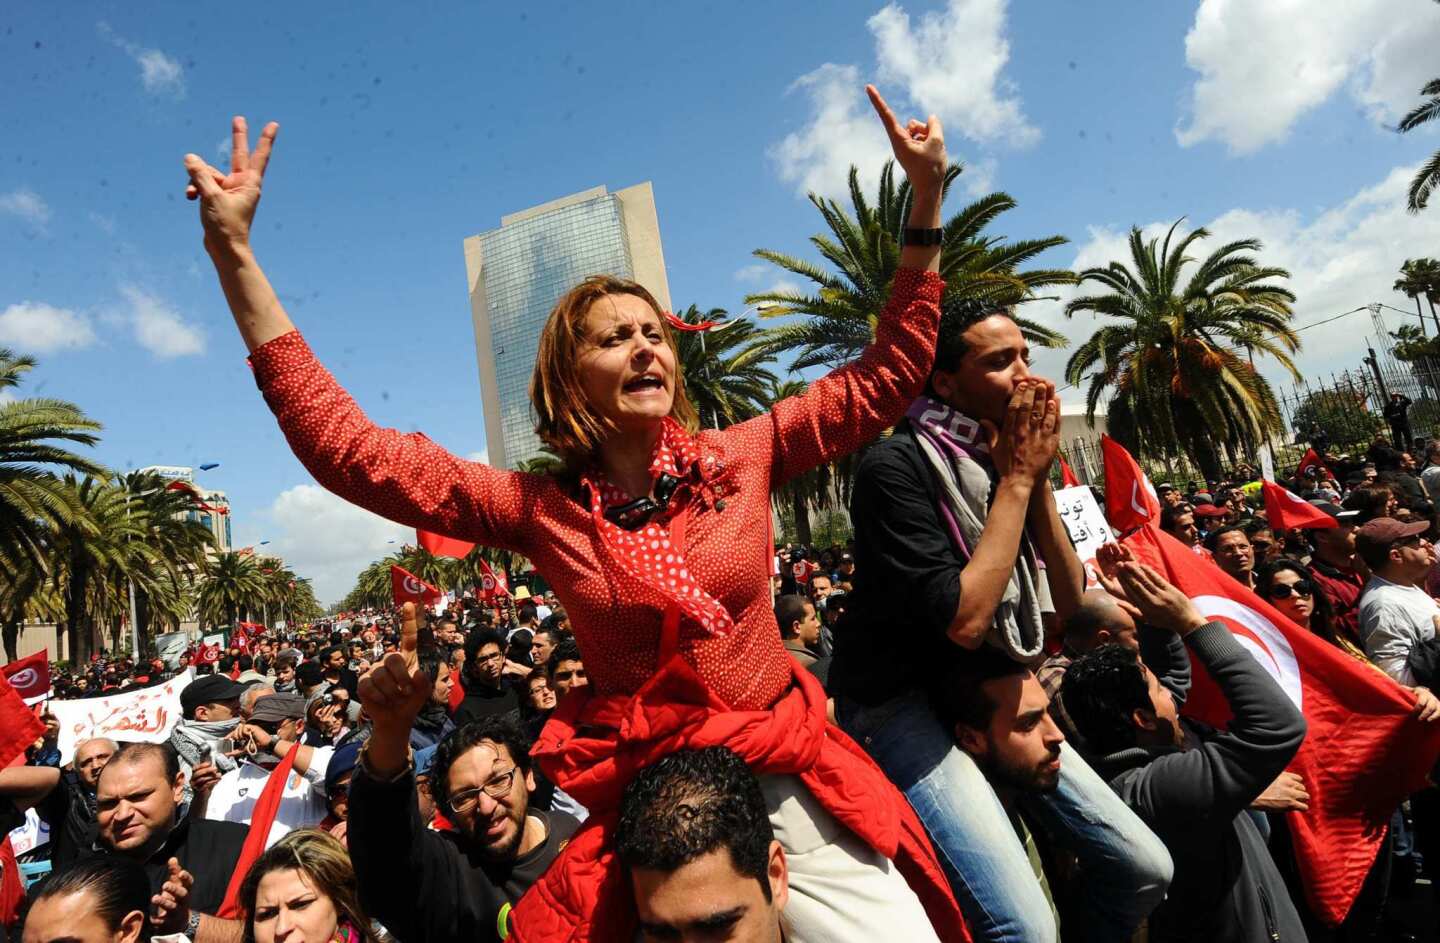 Tunisian doctor and human rights defender Amna Mnif, center, is among the protesters who showed up Monday for a Martyrs' Day rally in Tunisia's capital Tunis, despite a ban on demonstrations there.